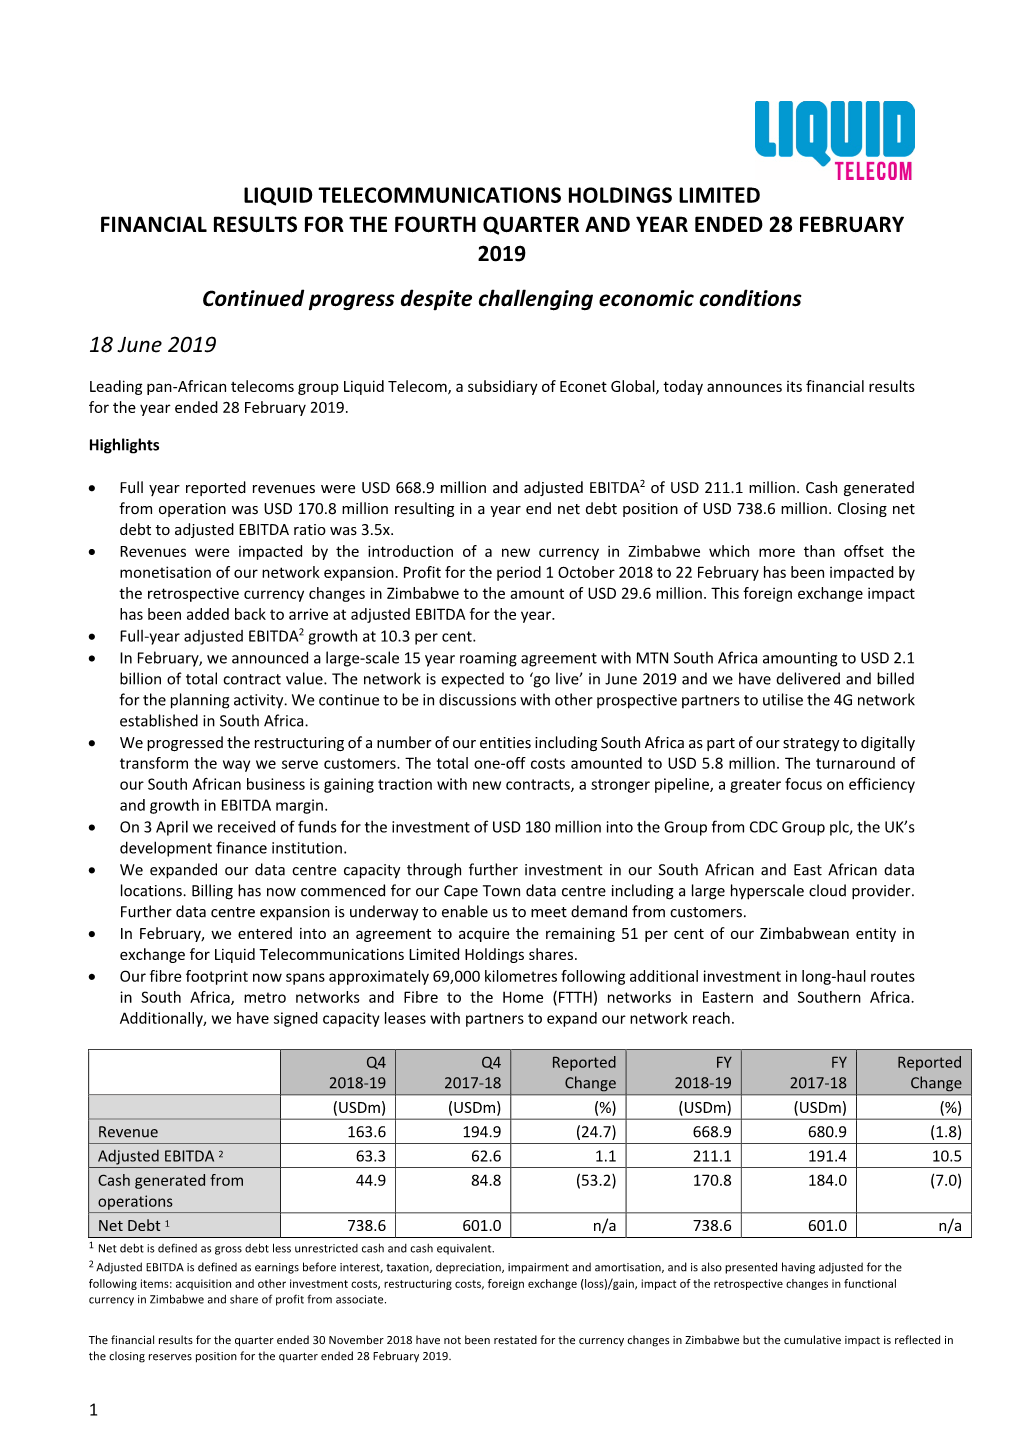 Liquid Telecommunications Holdings Limited Financial Results for the Fourth Quarter and Year Ended 28 February 2019